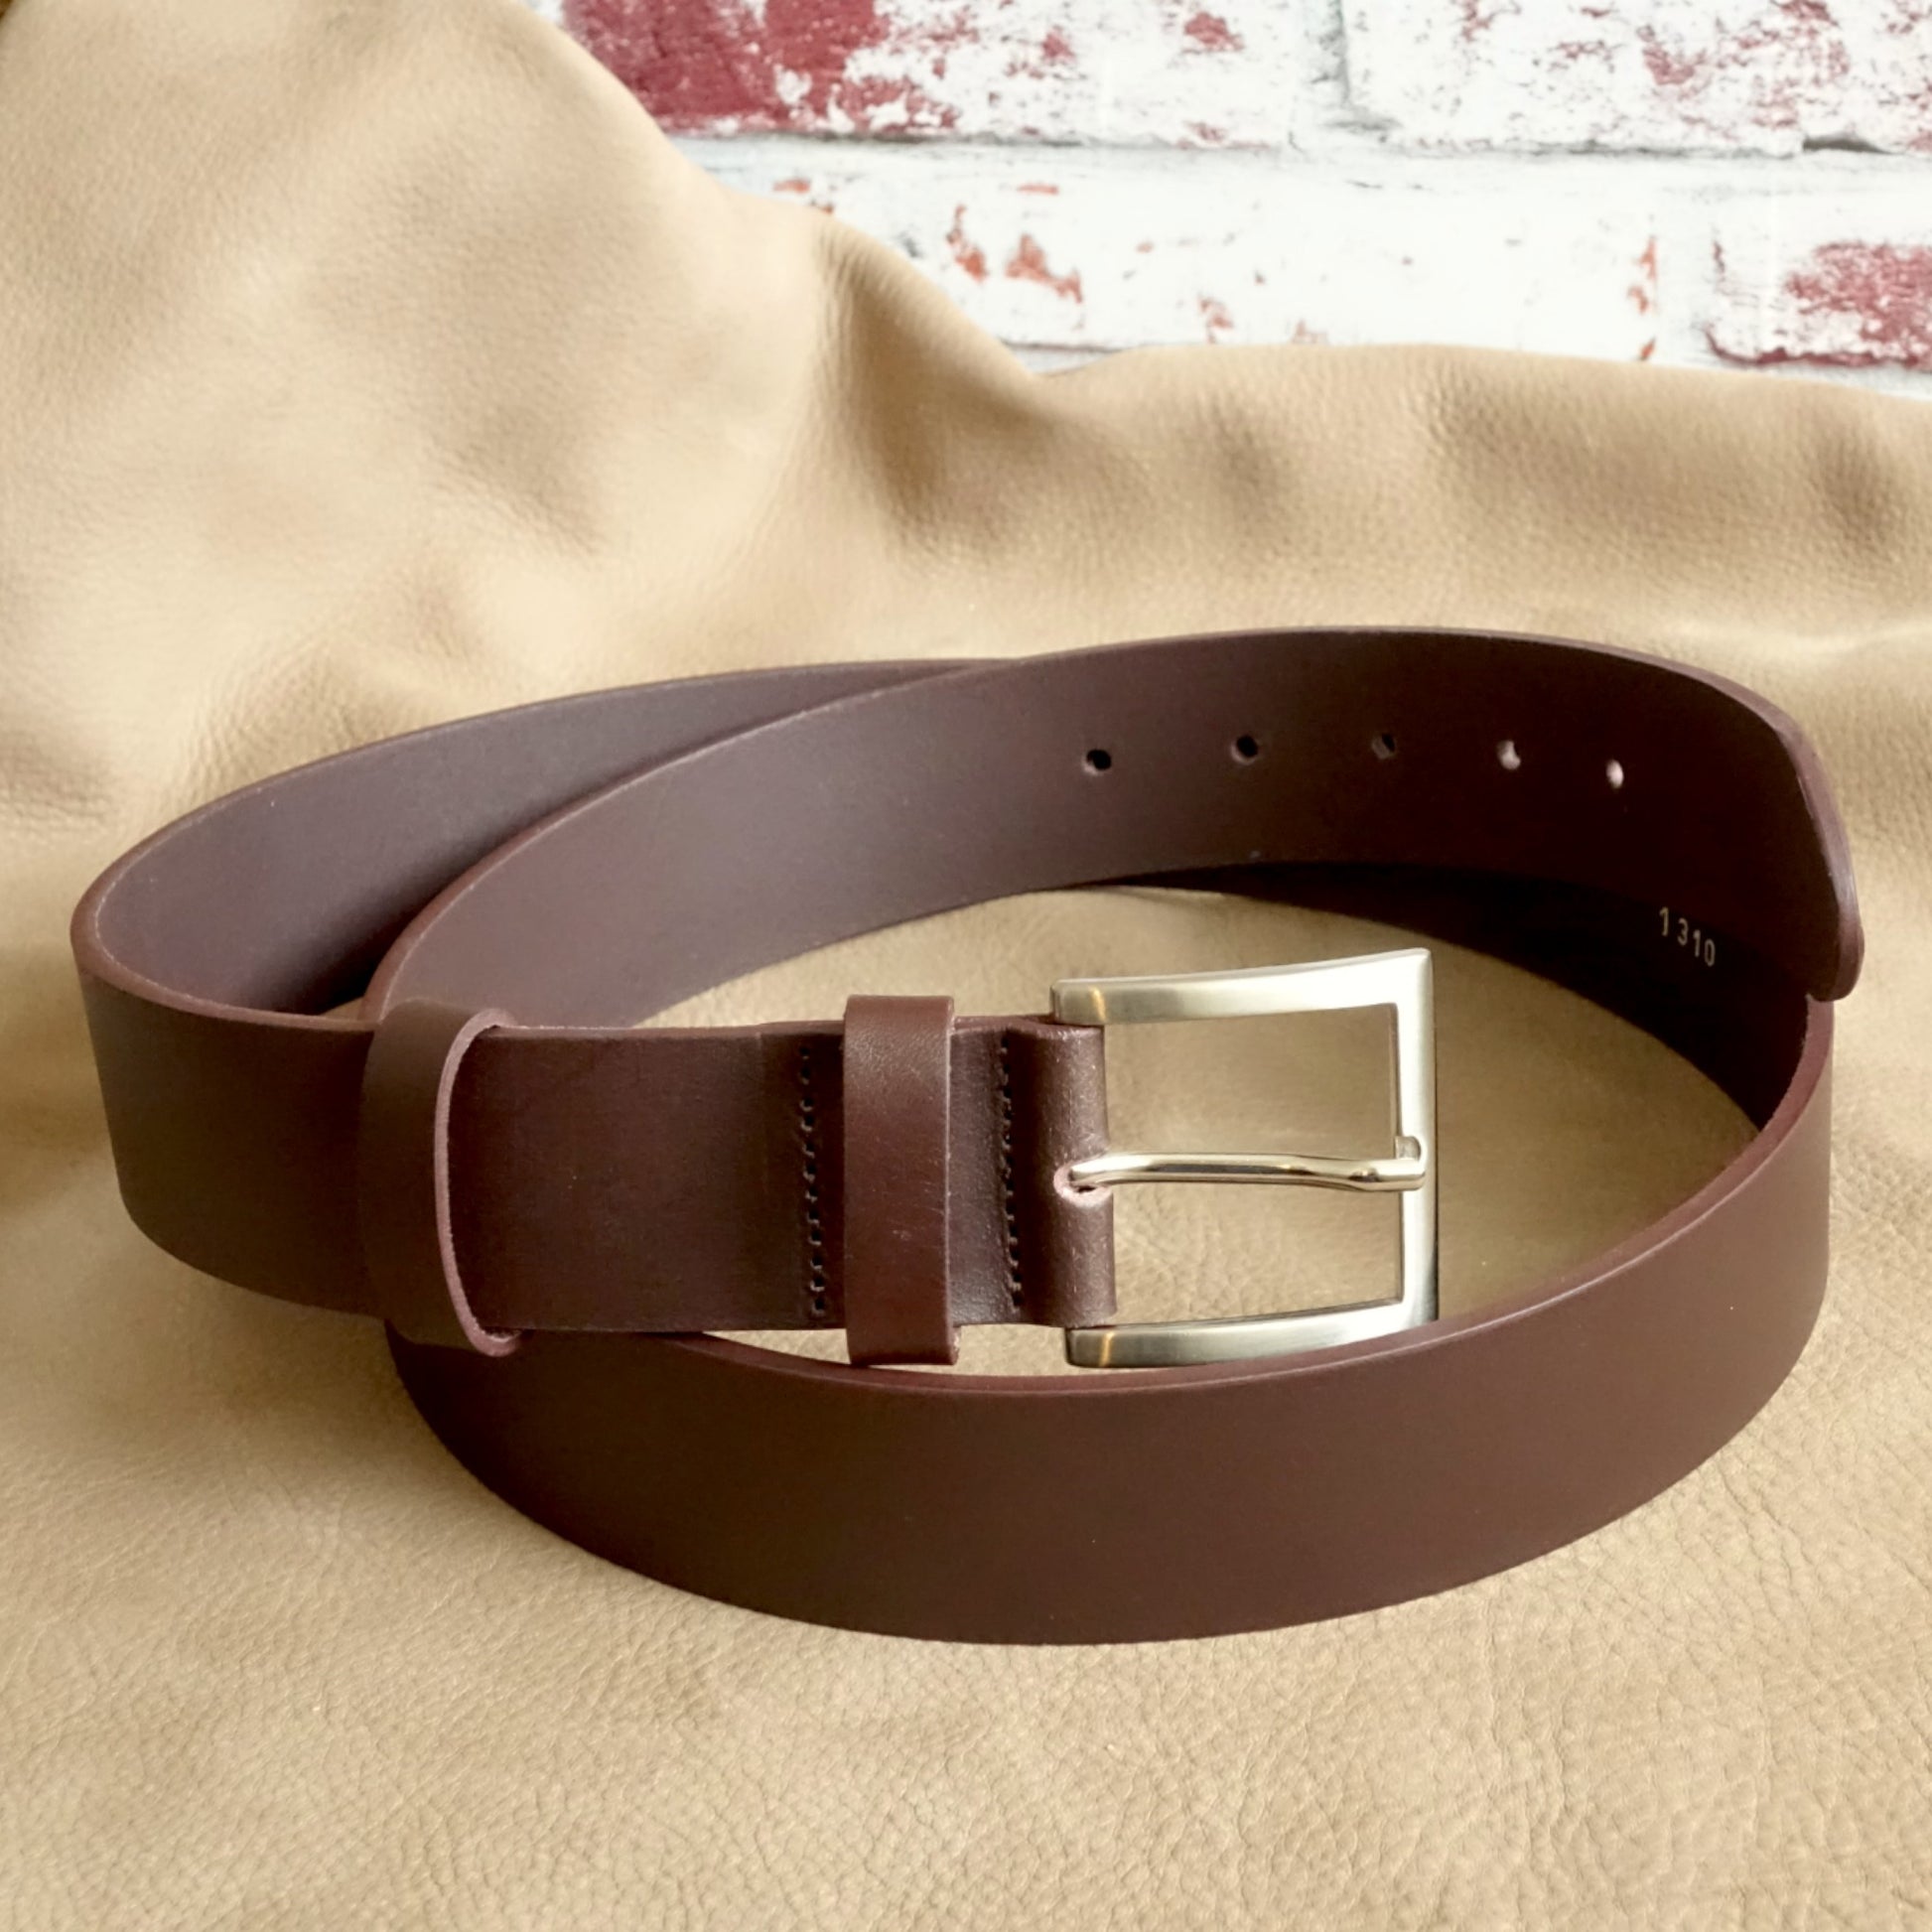 rgc handmade crafts leather belt brown for men and women 2